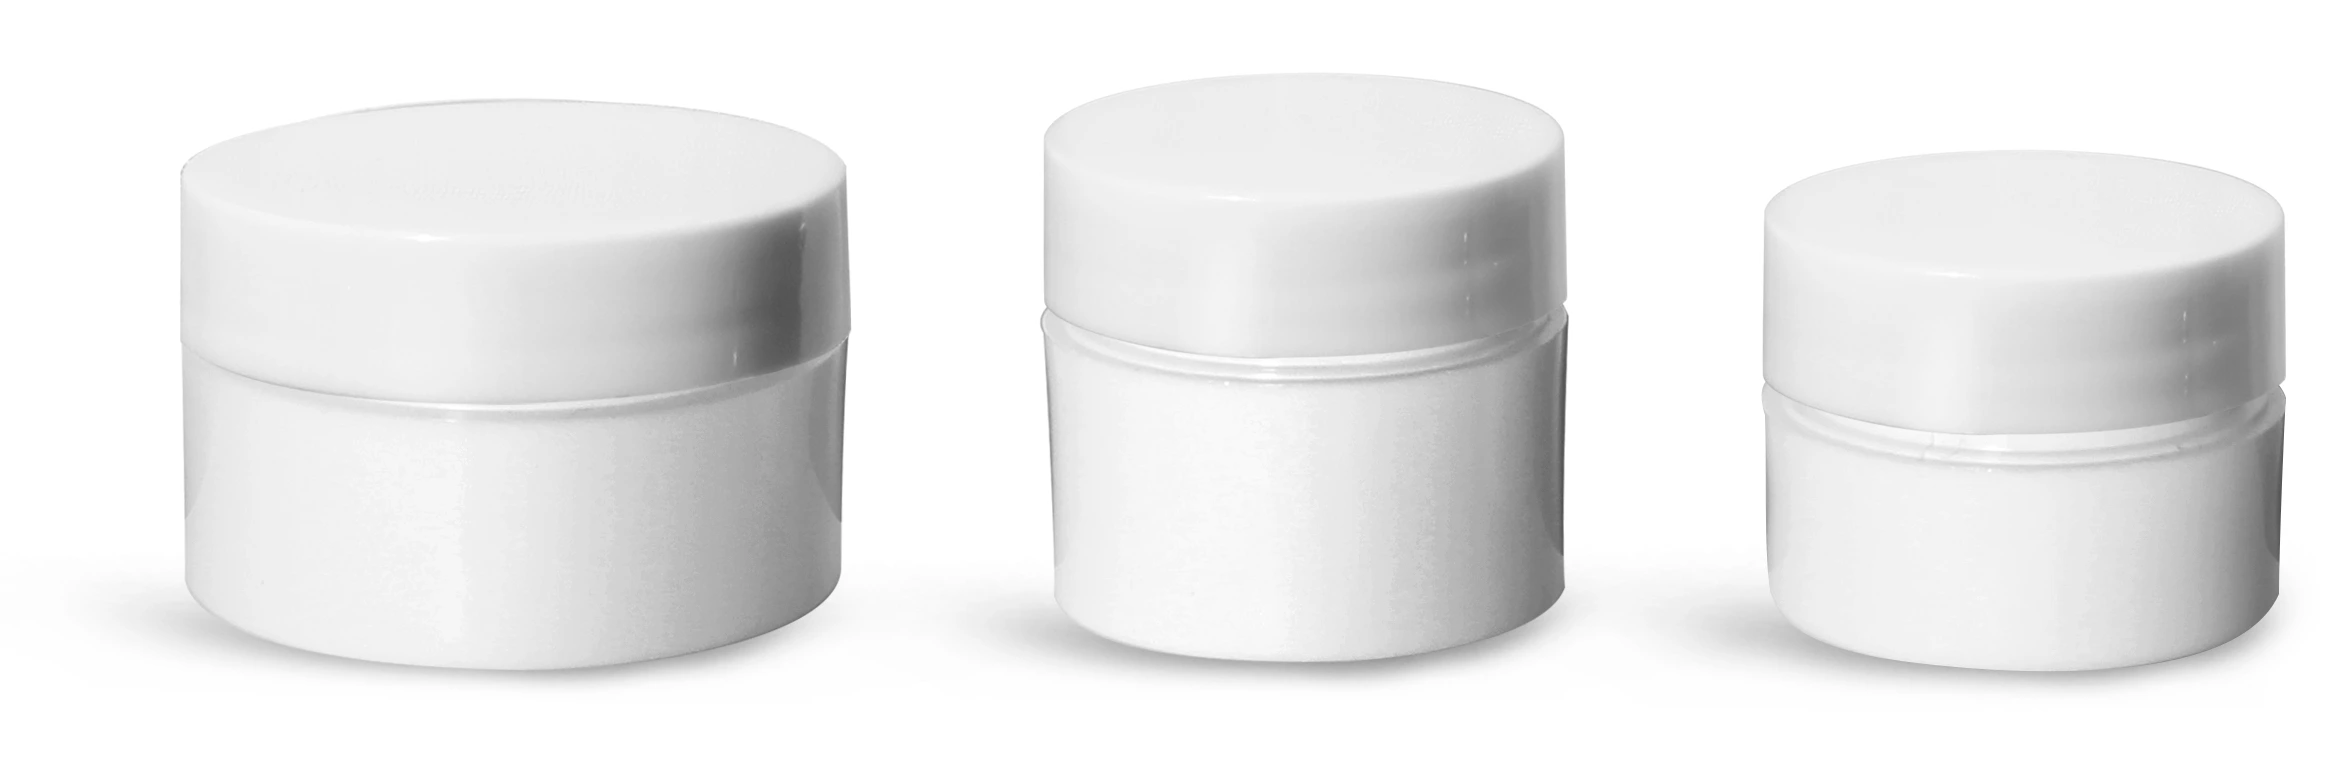 Polypropylene Plastic Jars, White Thick Wall Jars w/ White Lined Caps